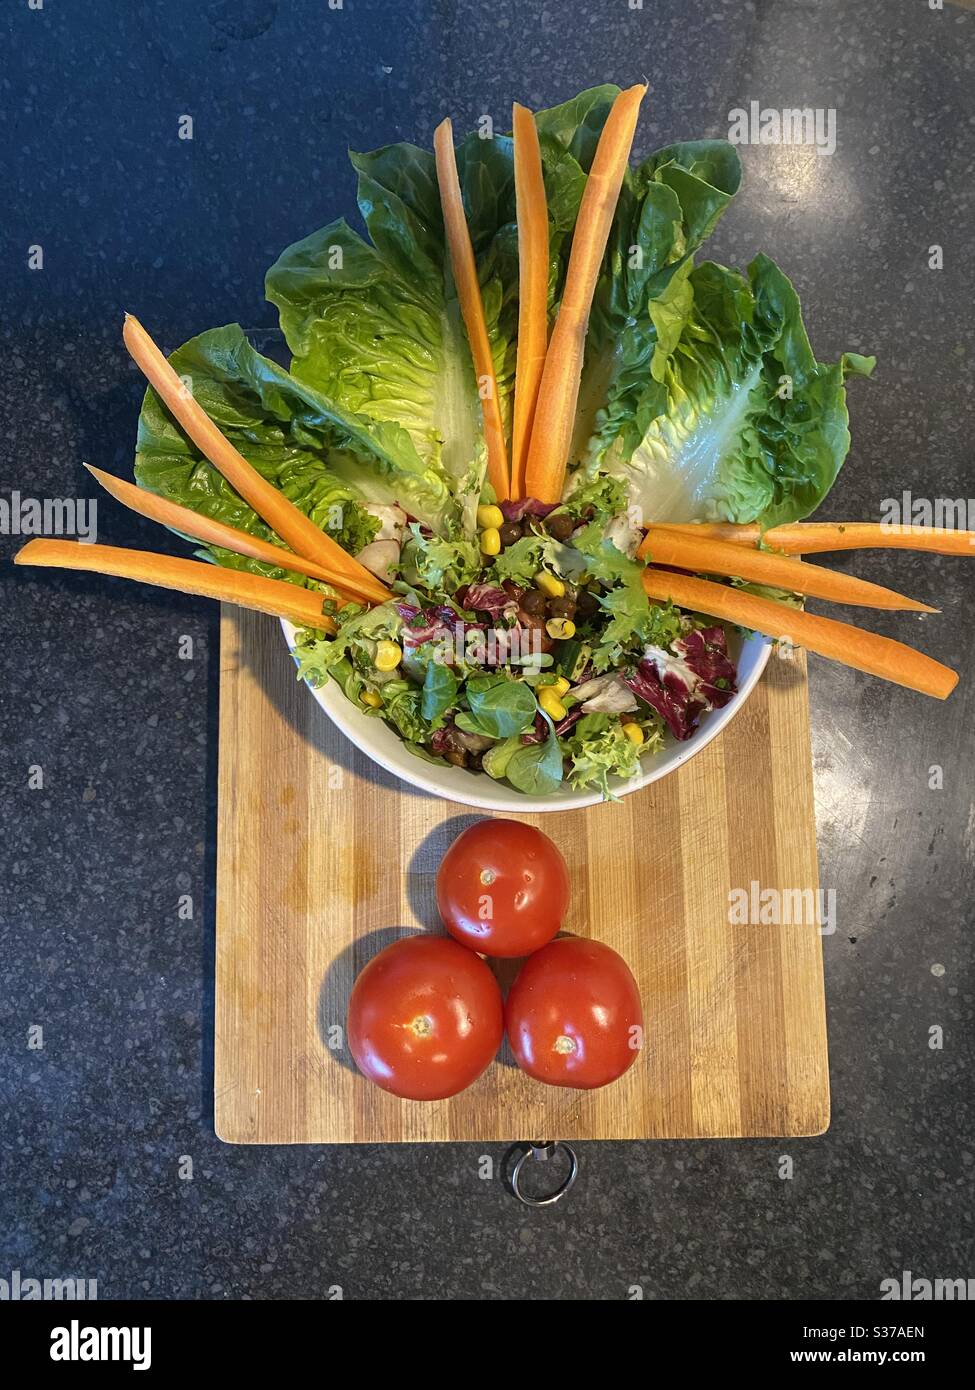 Bowl of salad ready to eat Stock Photo